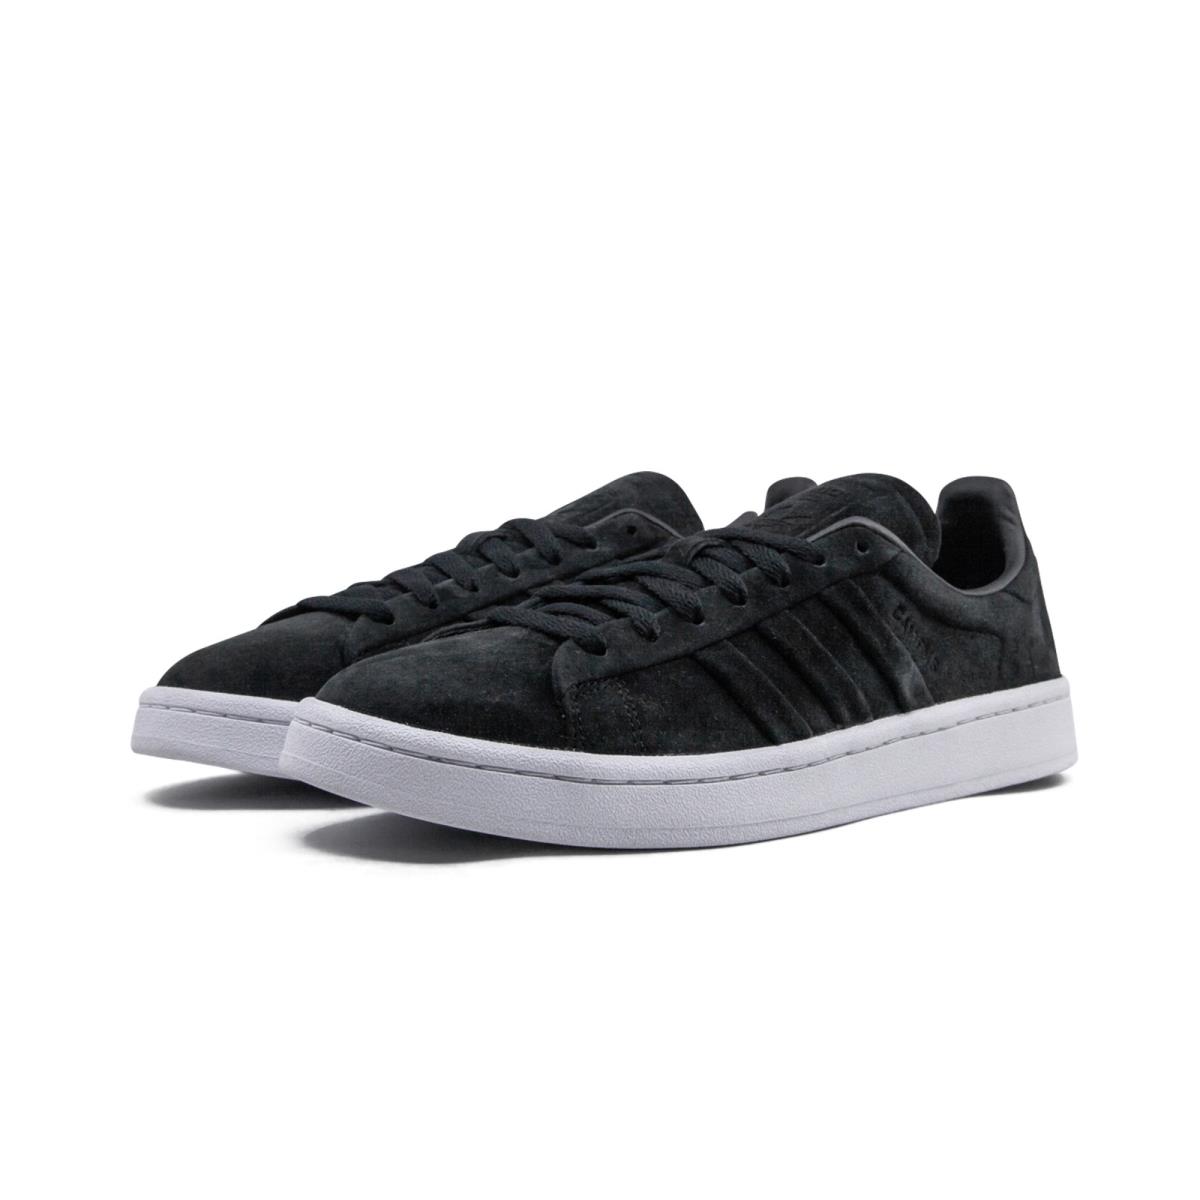 Adidas Men`s Campus Stitch and Turn Athletic Fashion Sneakers BB6745 - Black